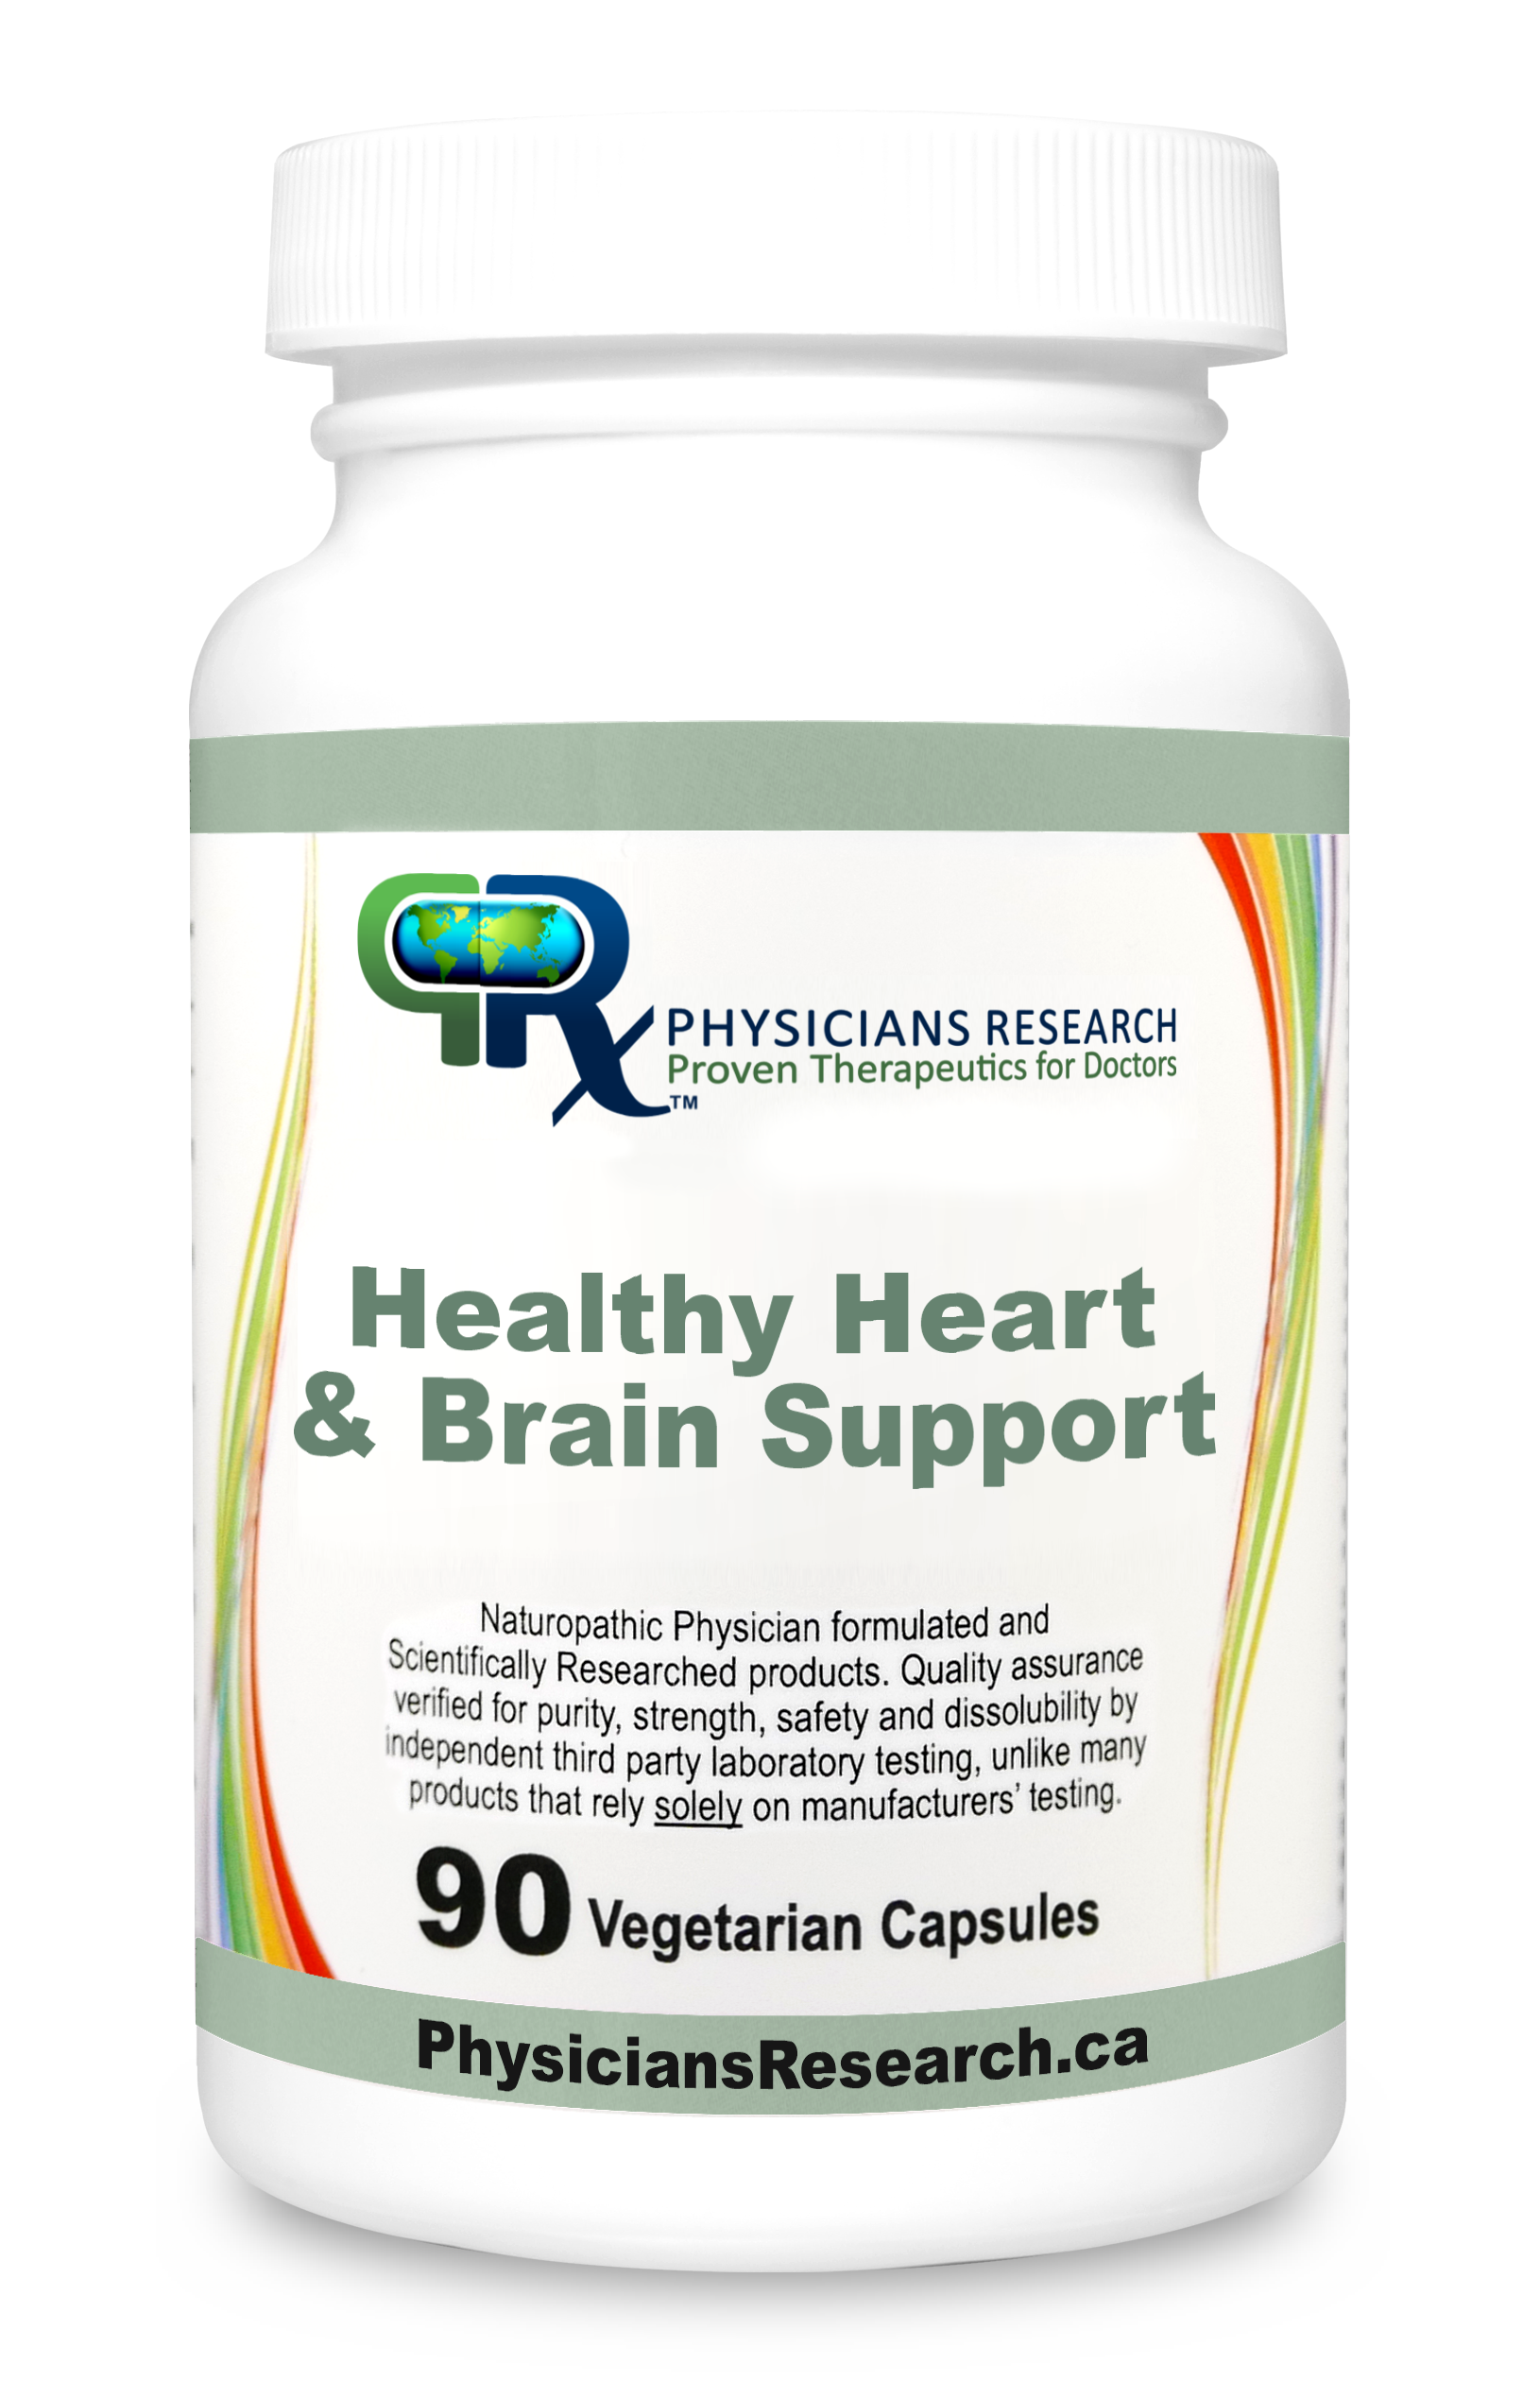 Metabolic support for cardiovascular health